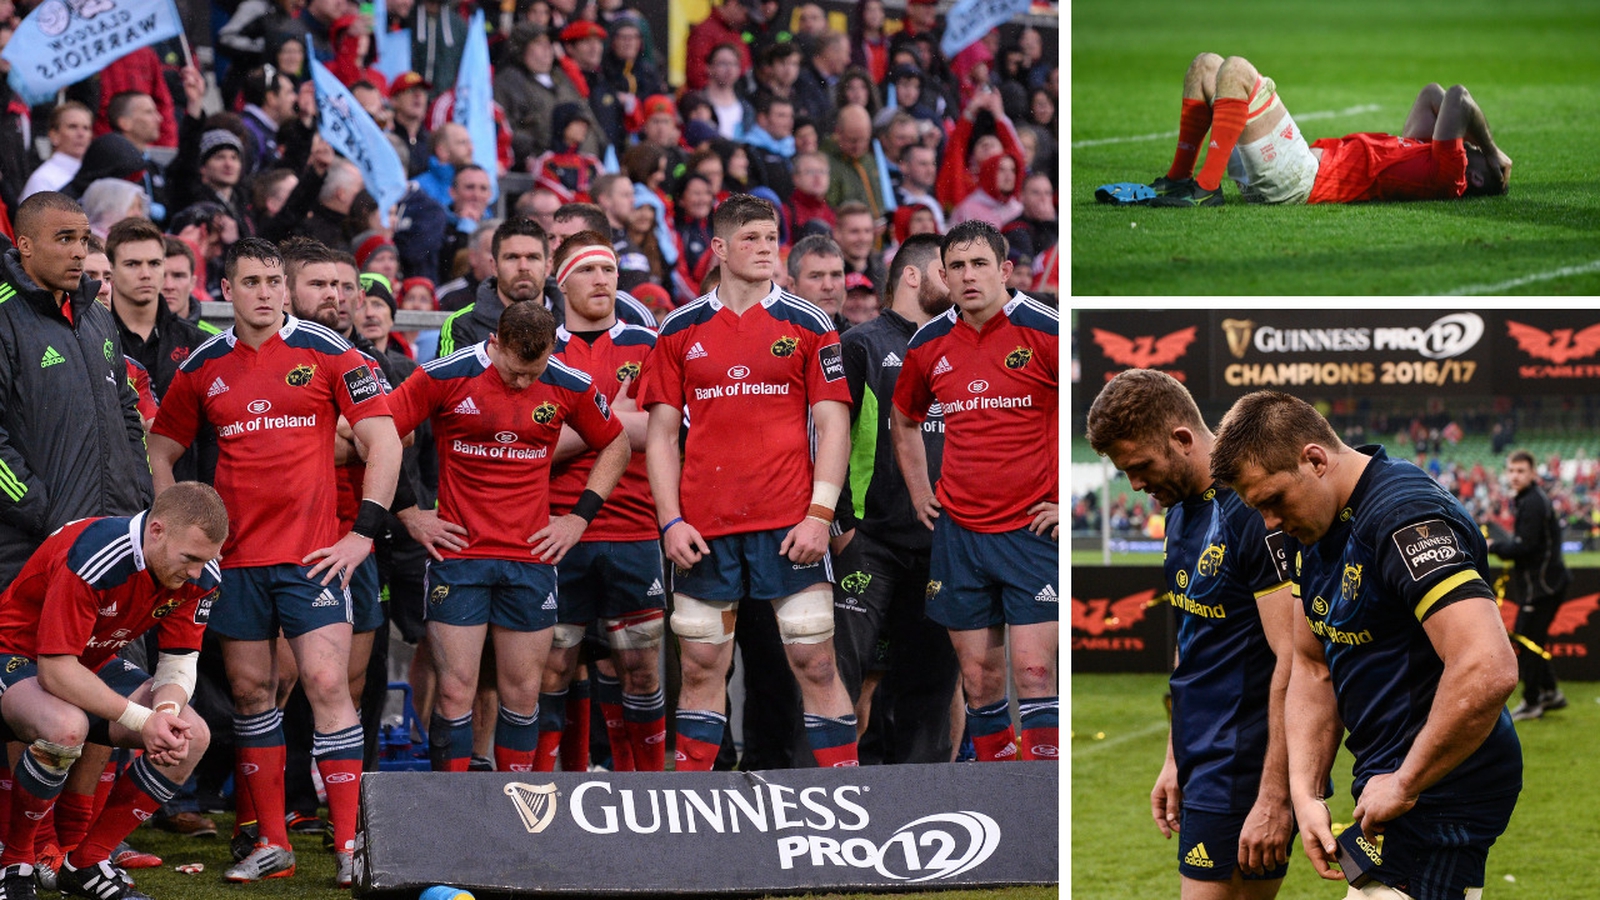 Fourth time lucky? Munster looking for Final say in SA